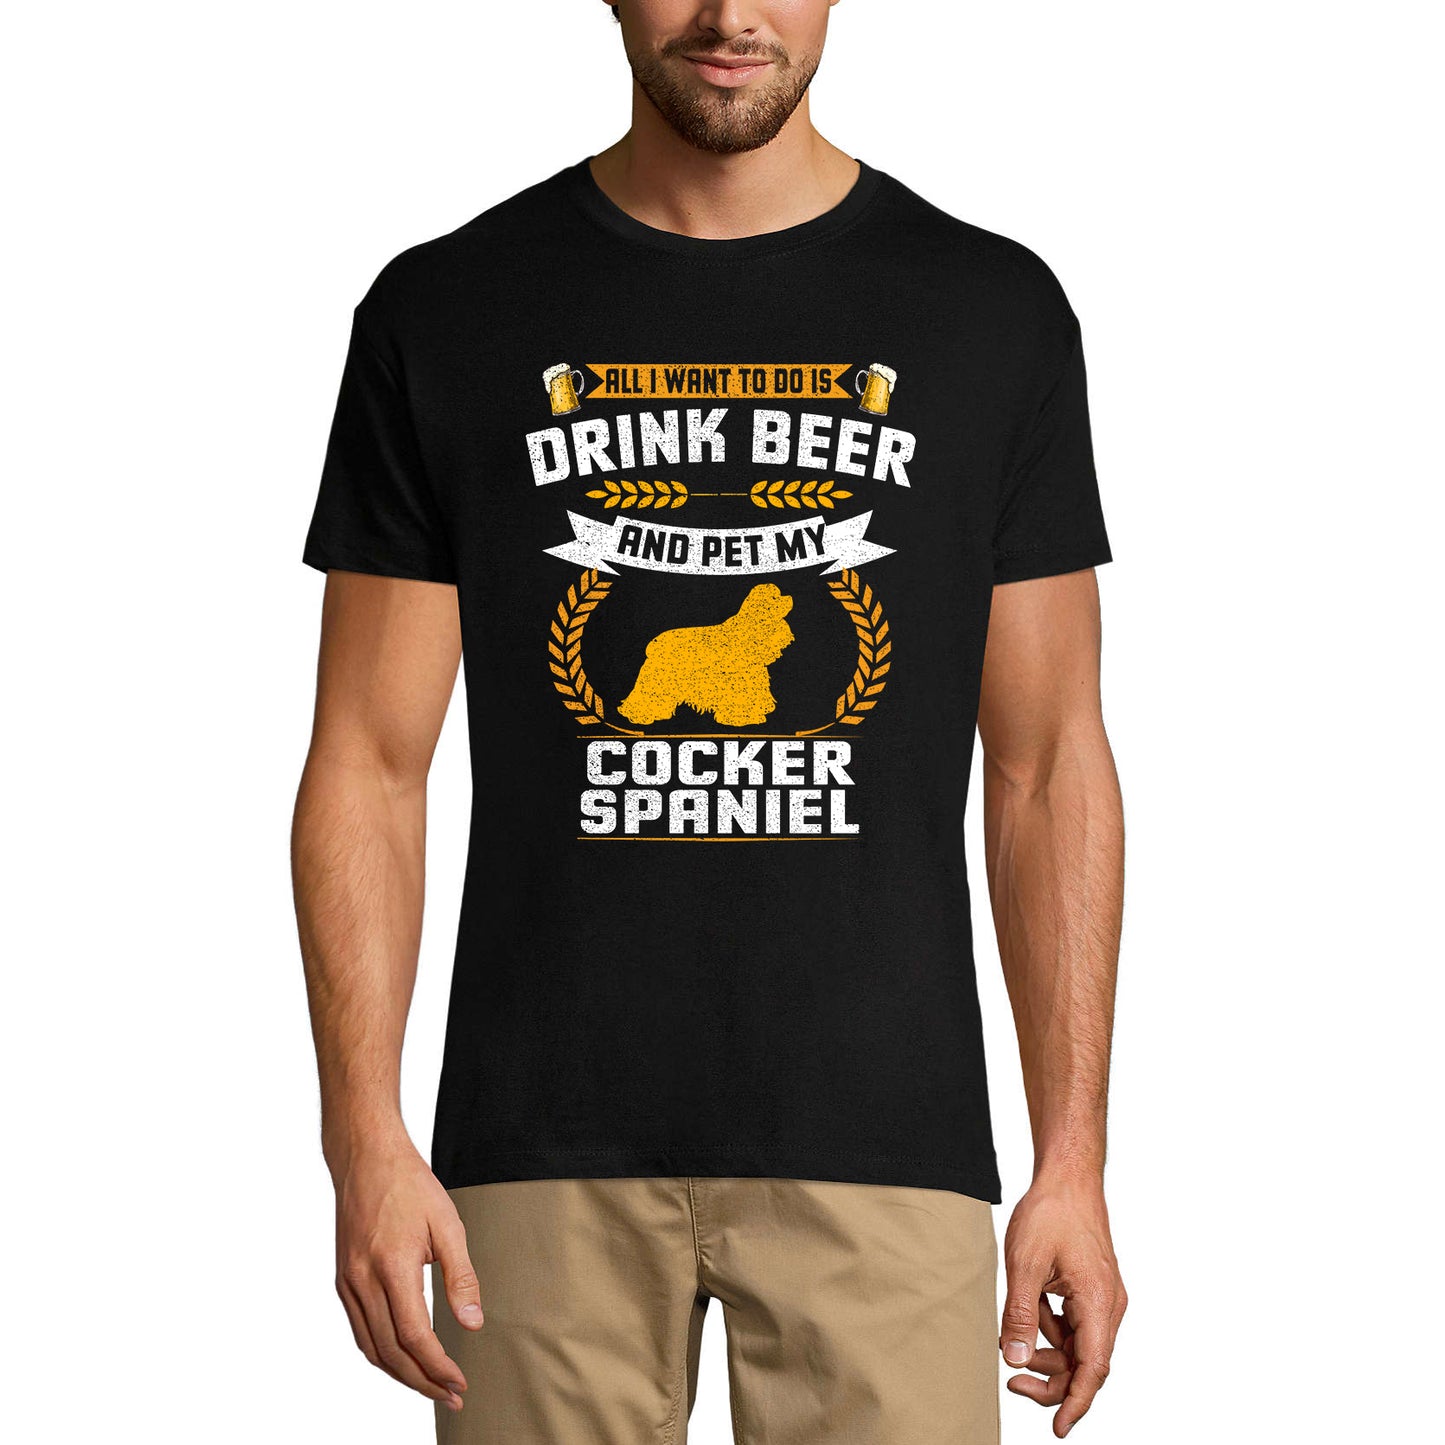 ULTRABASIC Men's T-Shirt All I Want to Do Is Drink Beer and Pet My Cocker Spaniel - Beer Dog Lover Tee Shirt